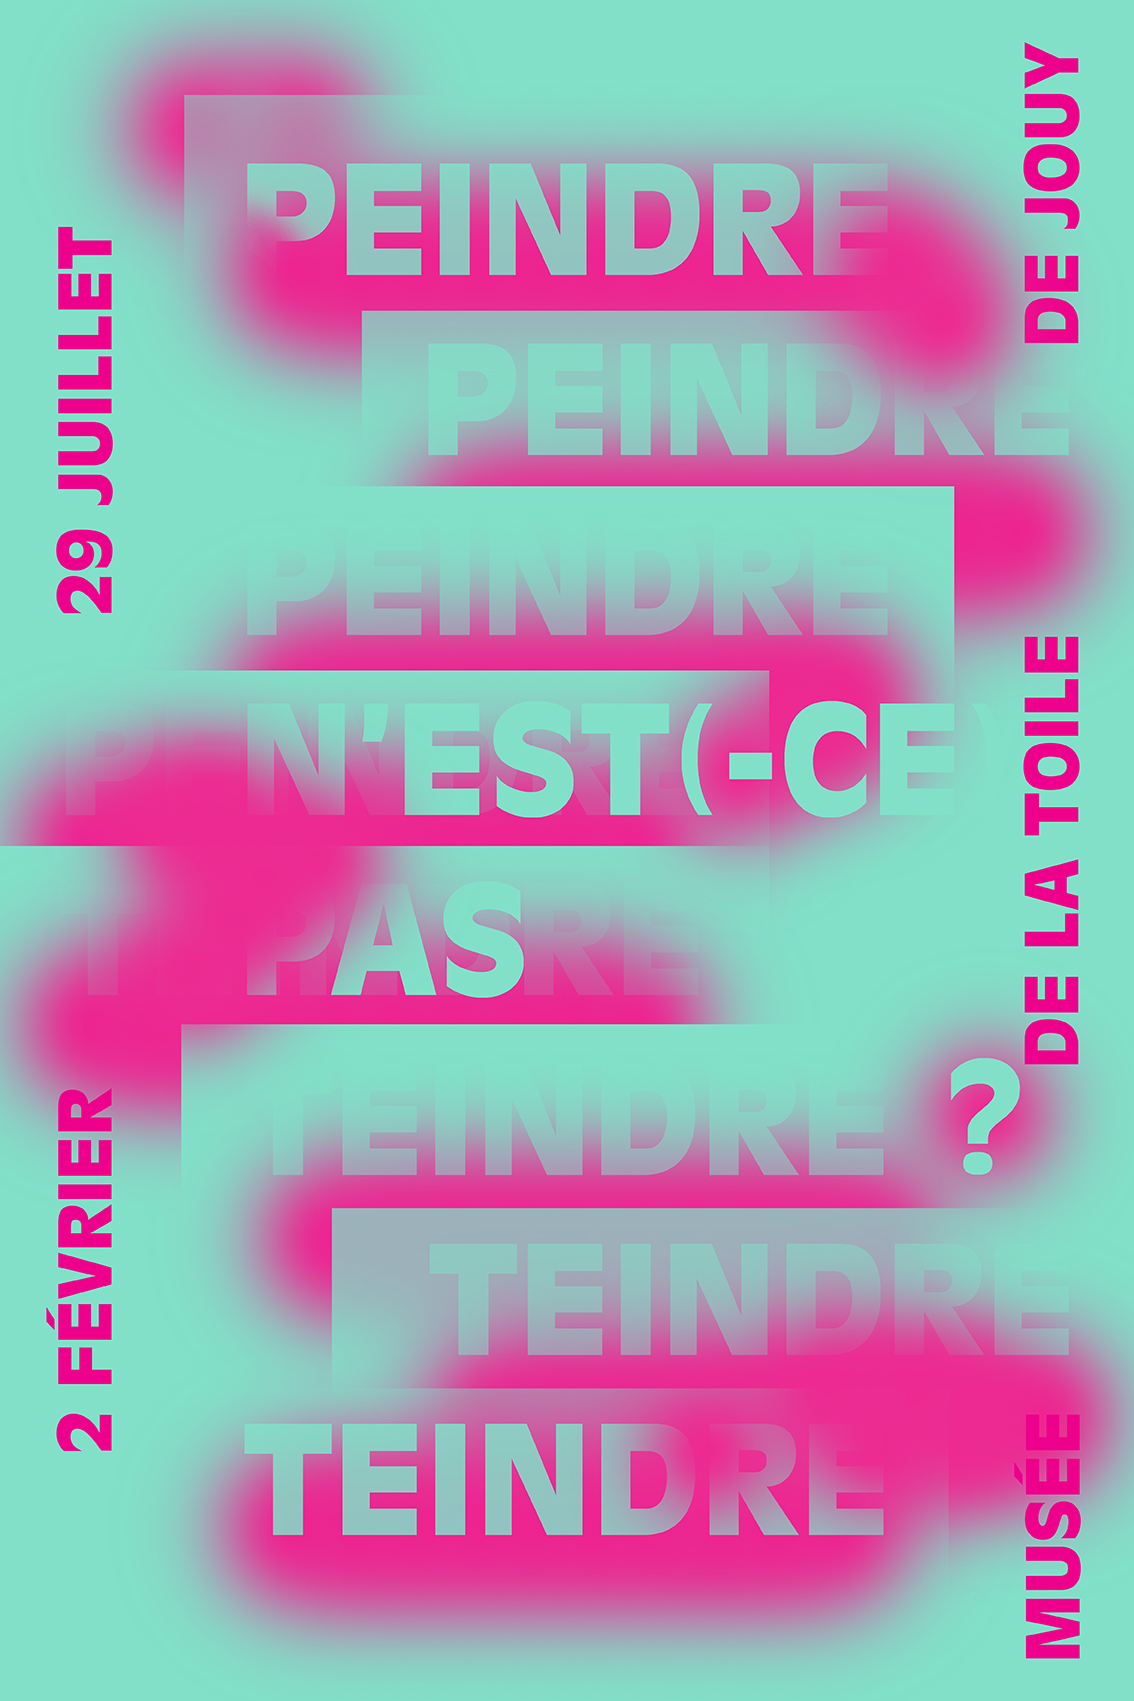 Visual of the poster for the event Peindre n'est-ce pas teindre ?